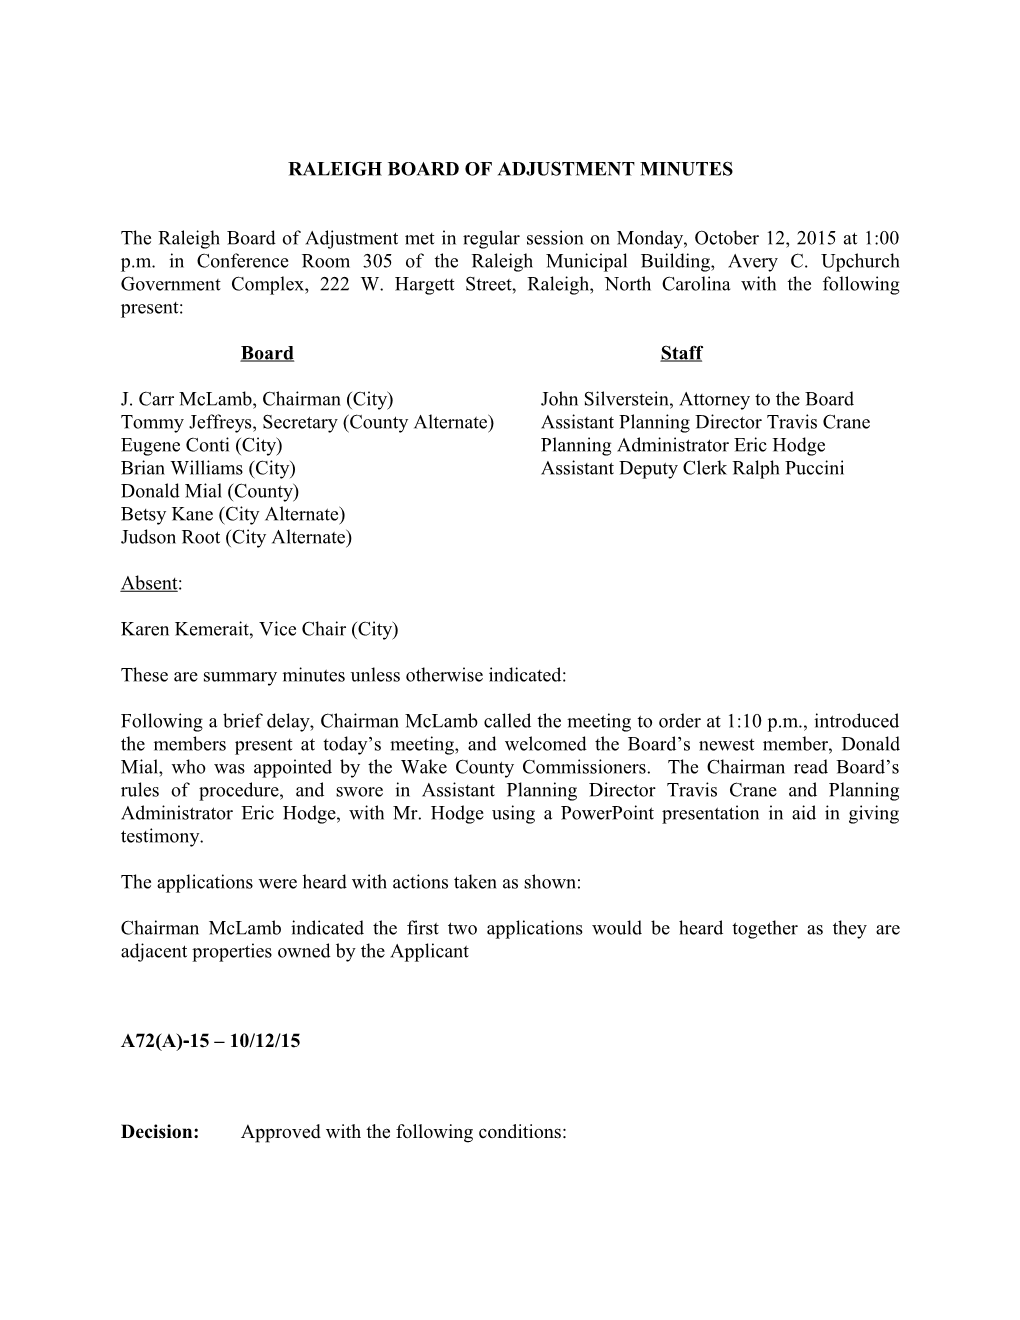 Raleigh Board of Adjustment Minutes - 10/12/2015